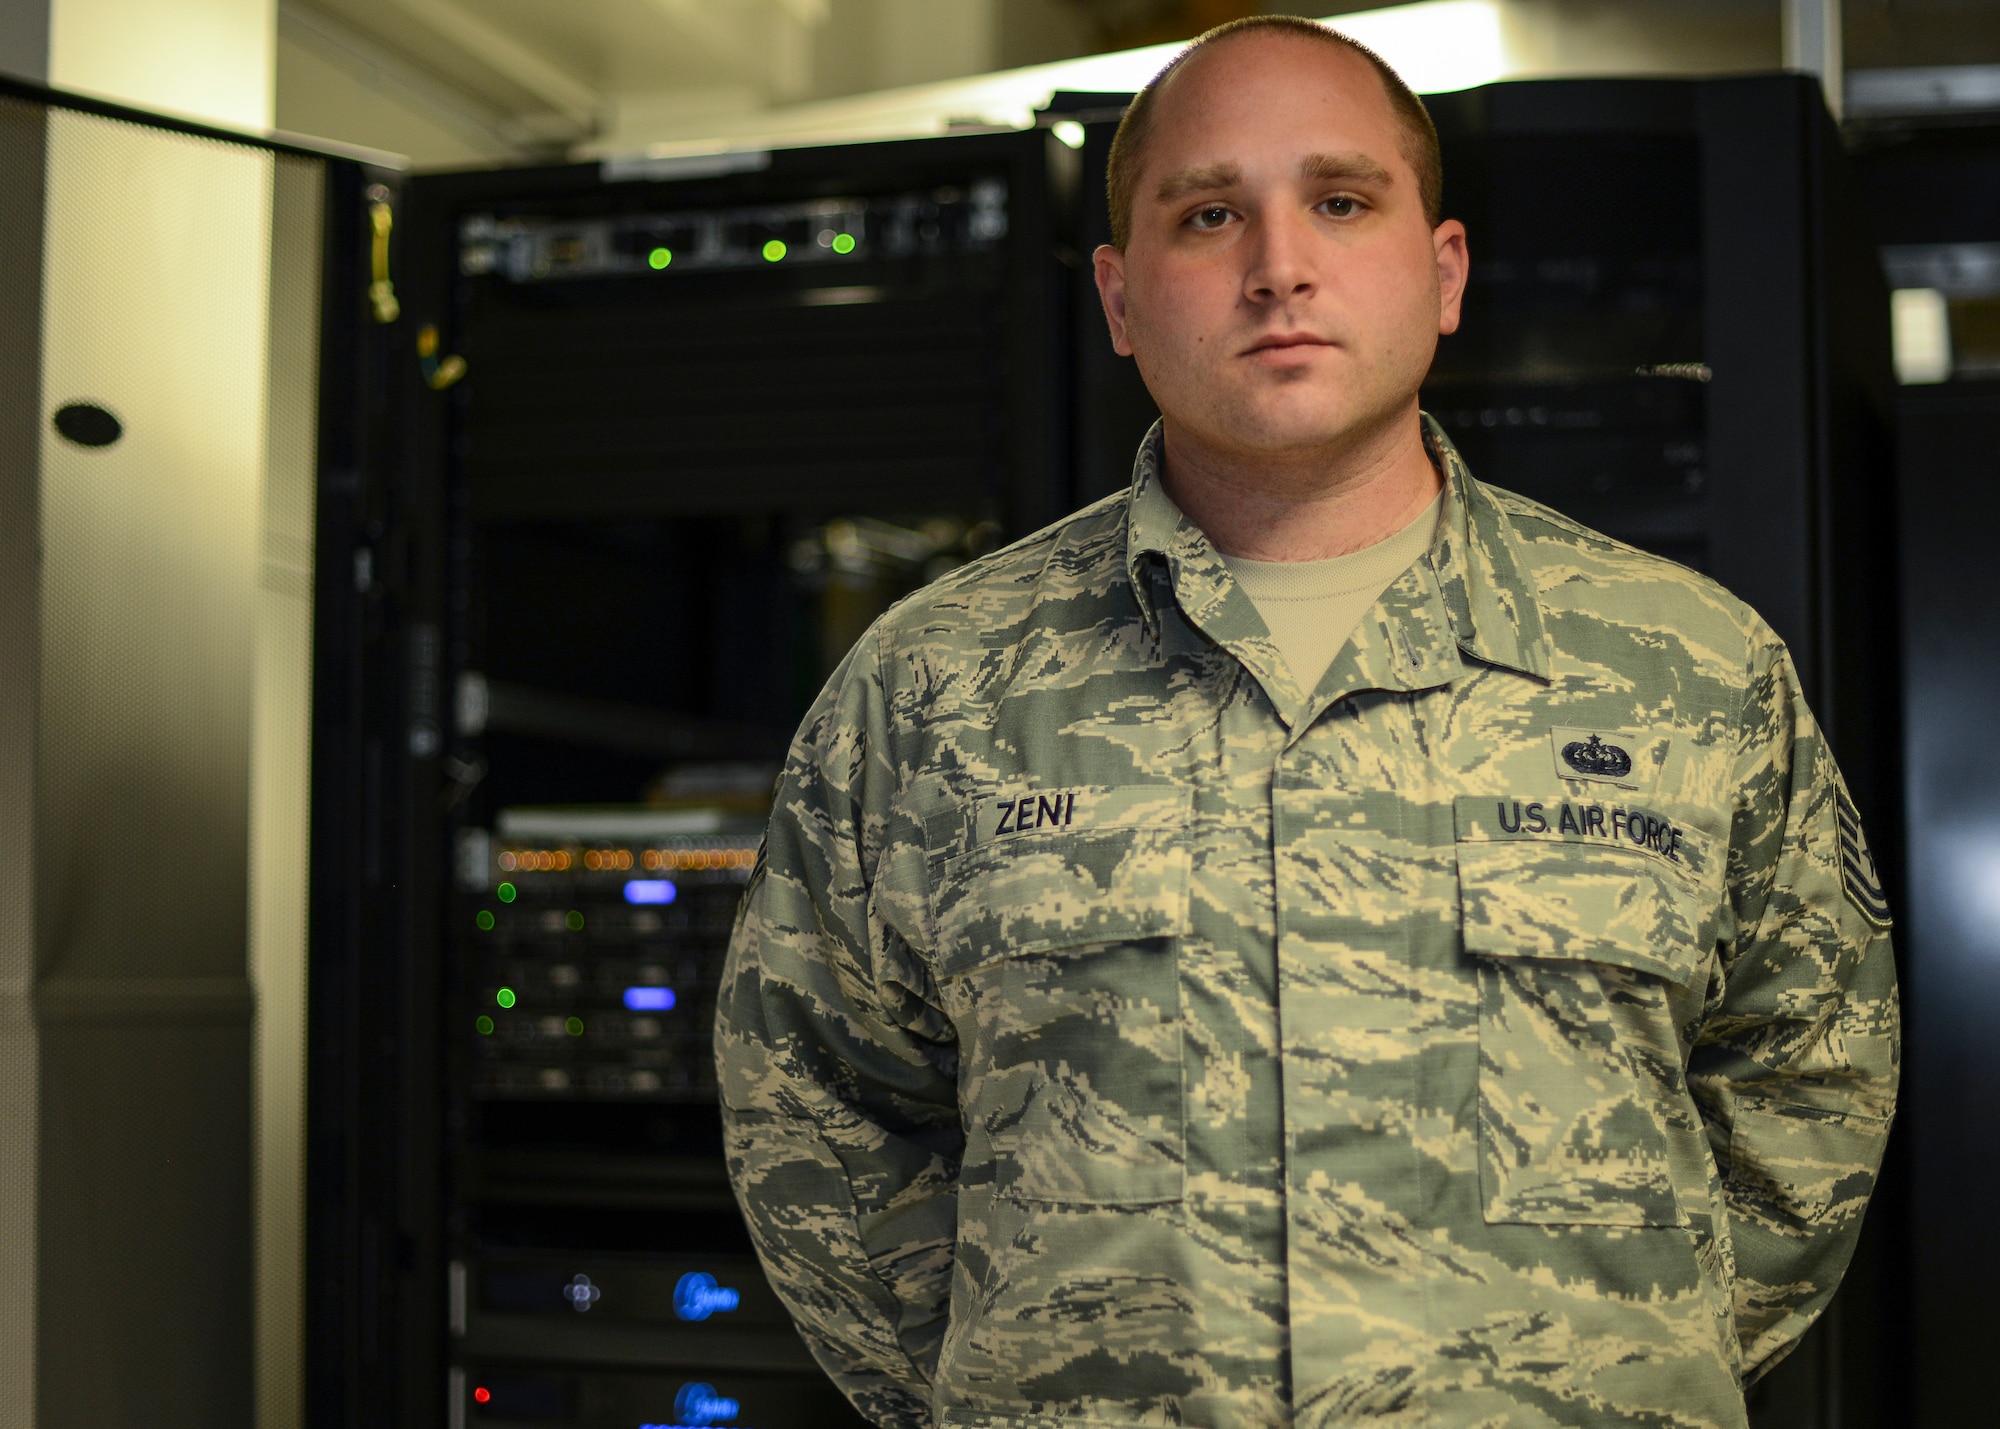 U.S. Air Force Tech. Sgt. Sean Zeni, a 792nd Intelligence Support Squadron cyber transport systems technician, is one of two Airmen within Air Combat Command who successfully converted to a new cyber Air Force Specialty Code through a Headquarters Air Force initiative to create more fundamentals training across cyber career fields. (U.S. Air Force photo by Staff Sgt. Eboni Prince)